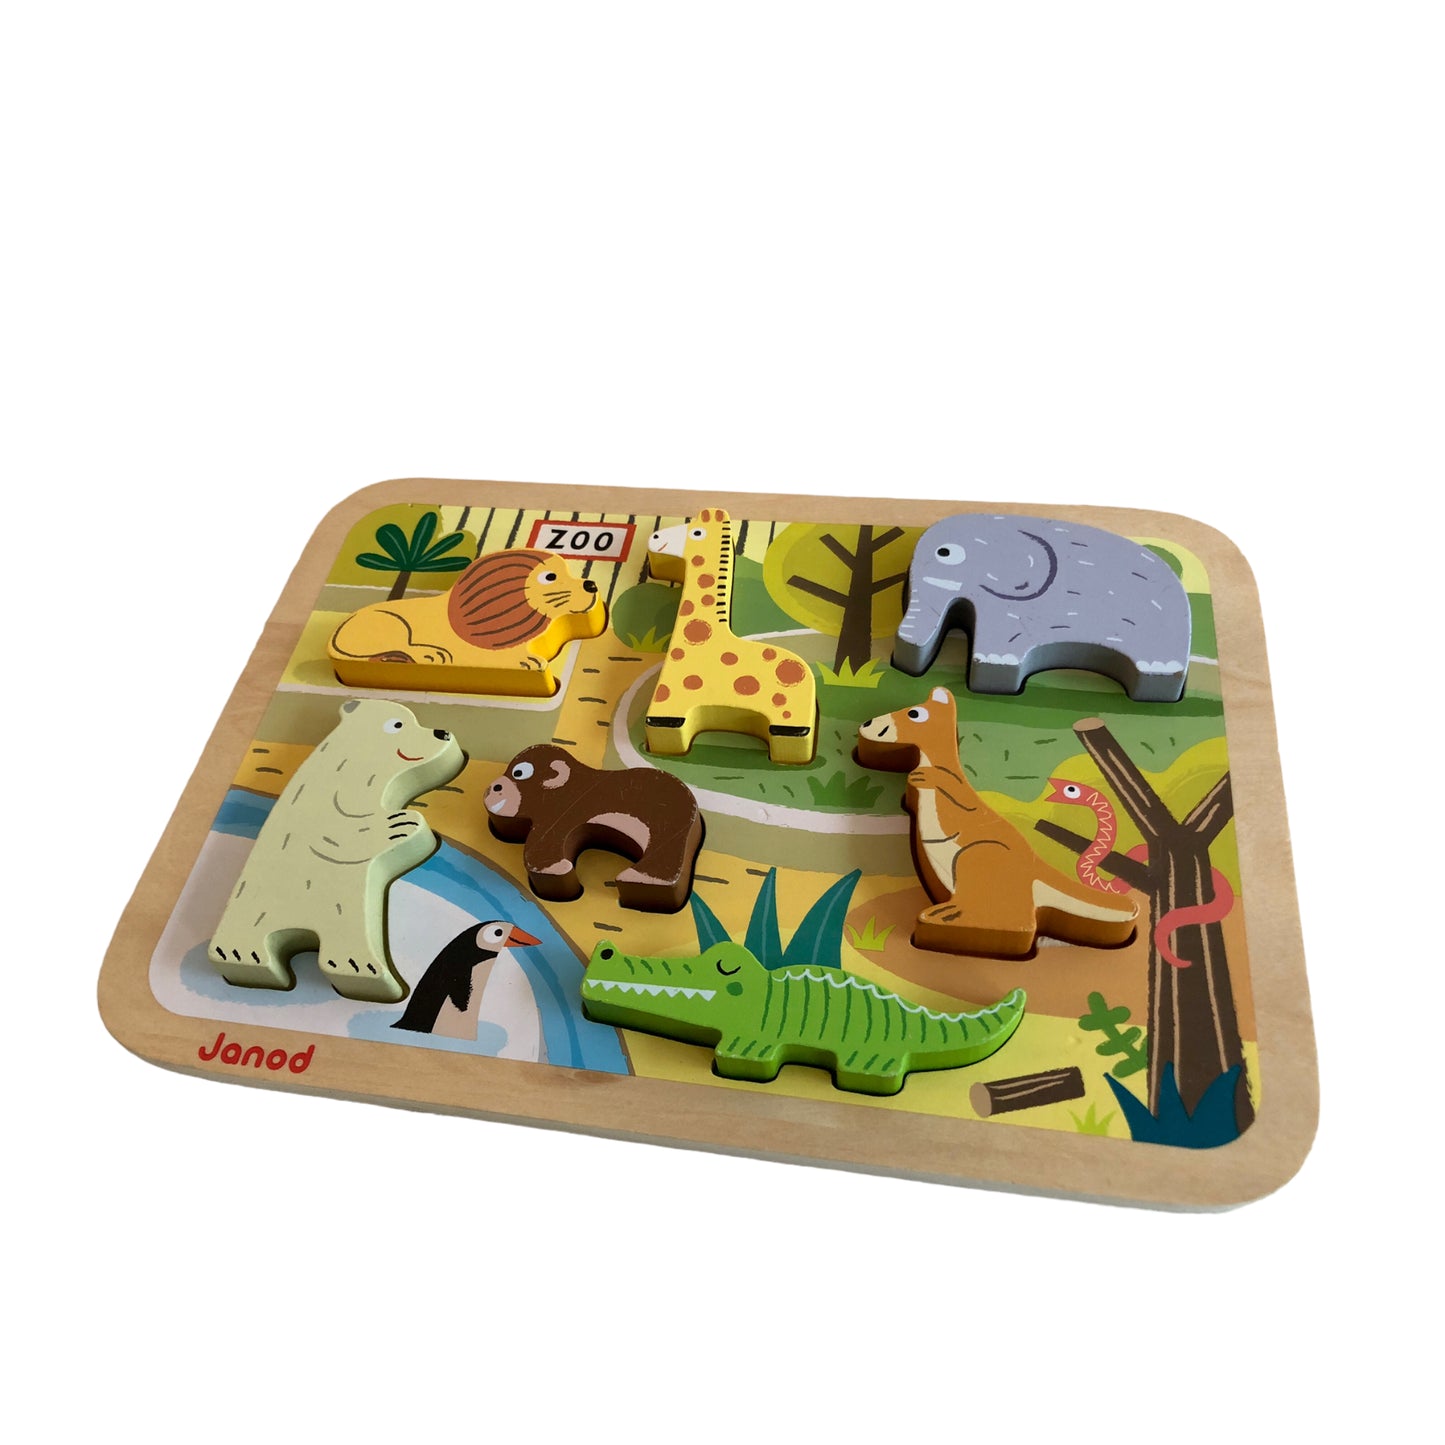 Janod - Chunky zoo Puzzle - 7 pieces